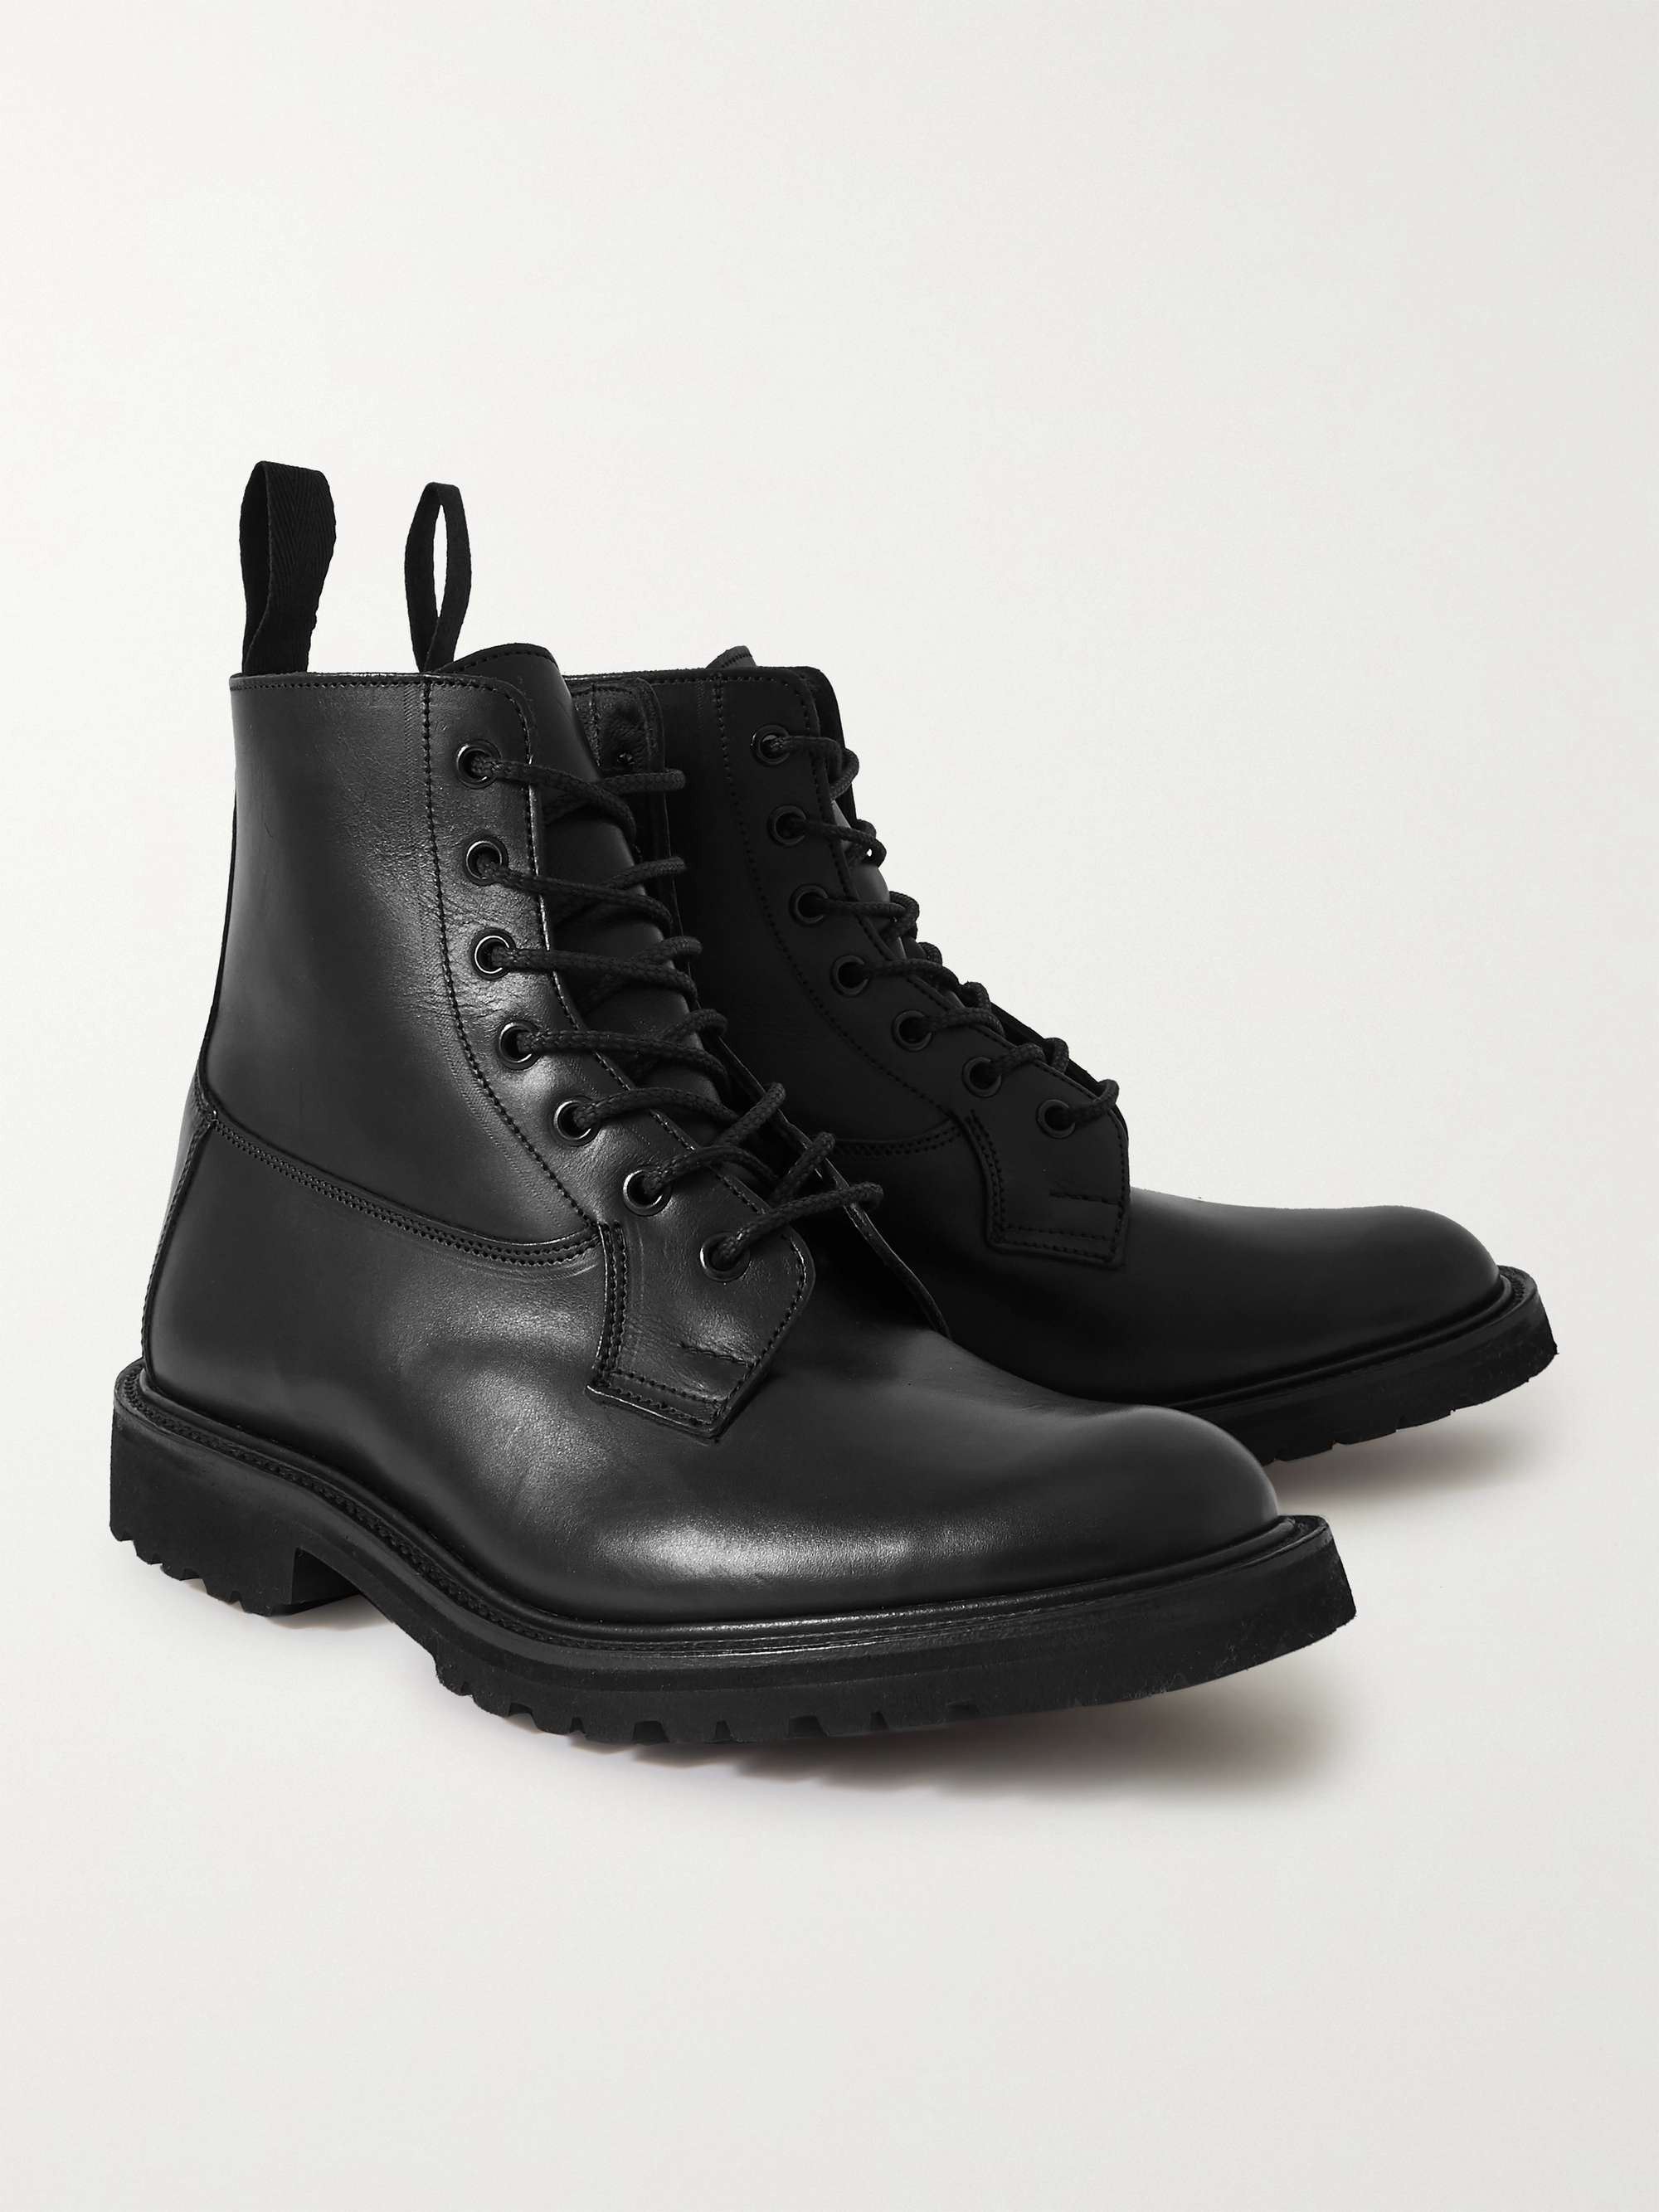 TRICKER'S Burford Leather Boots